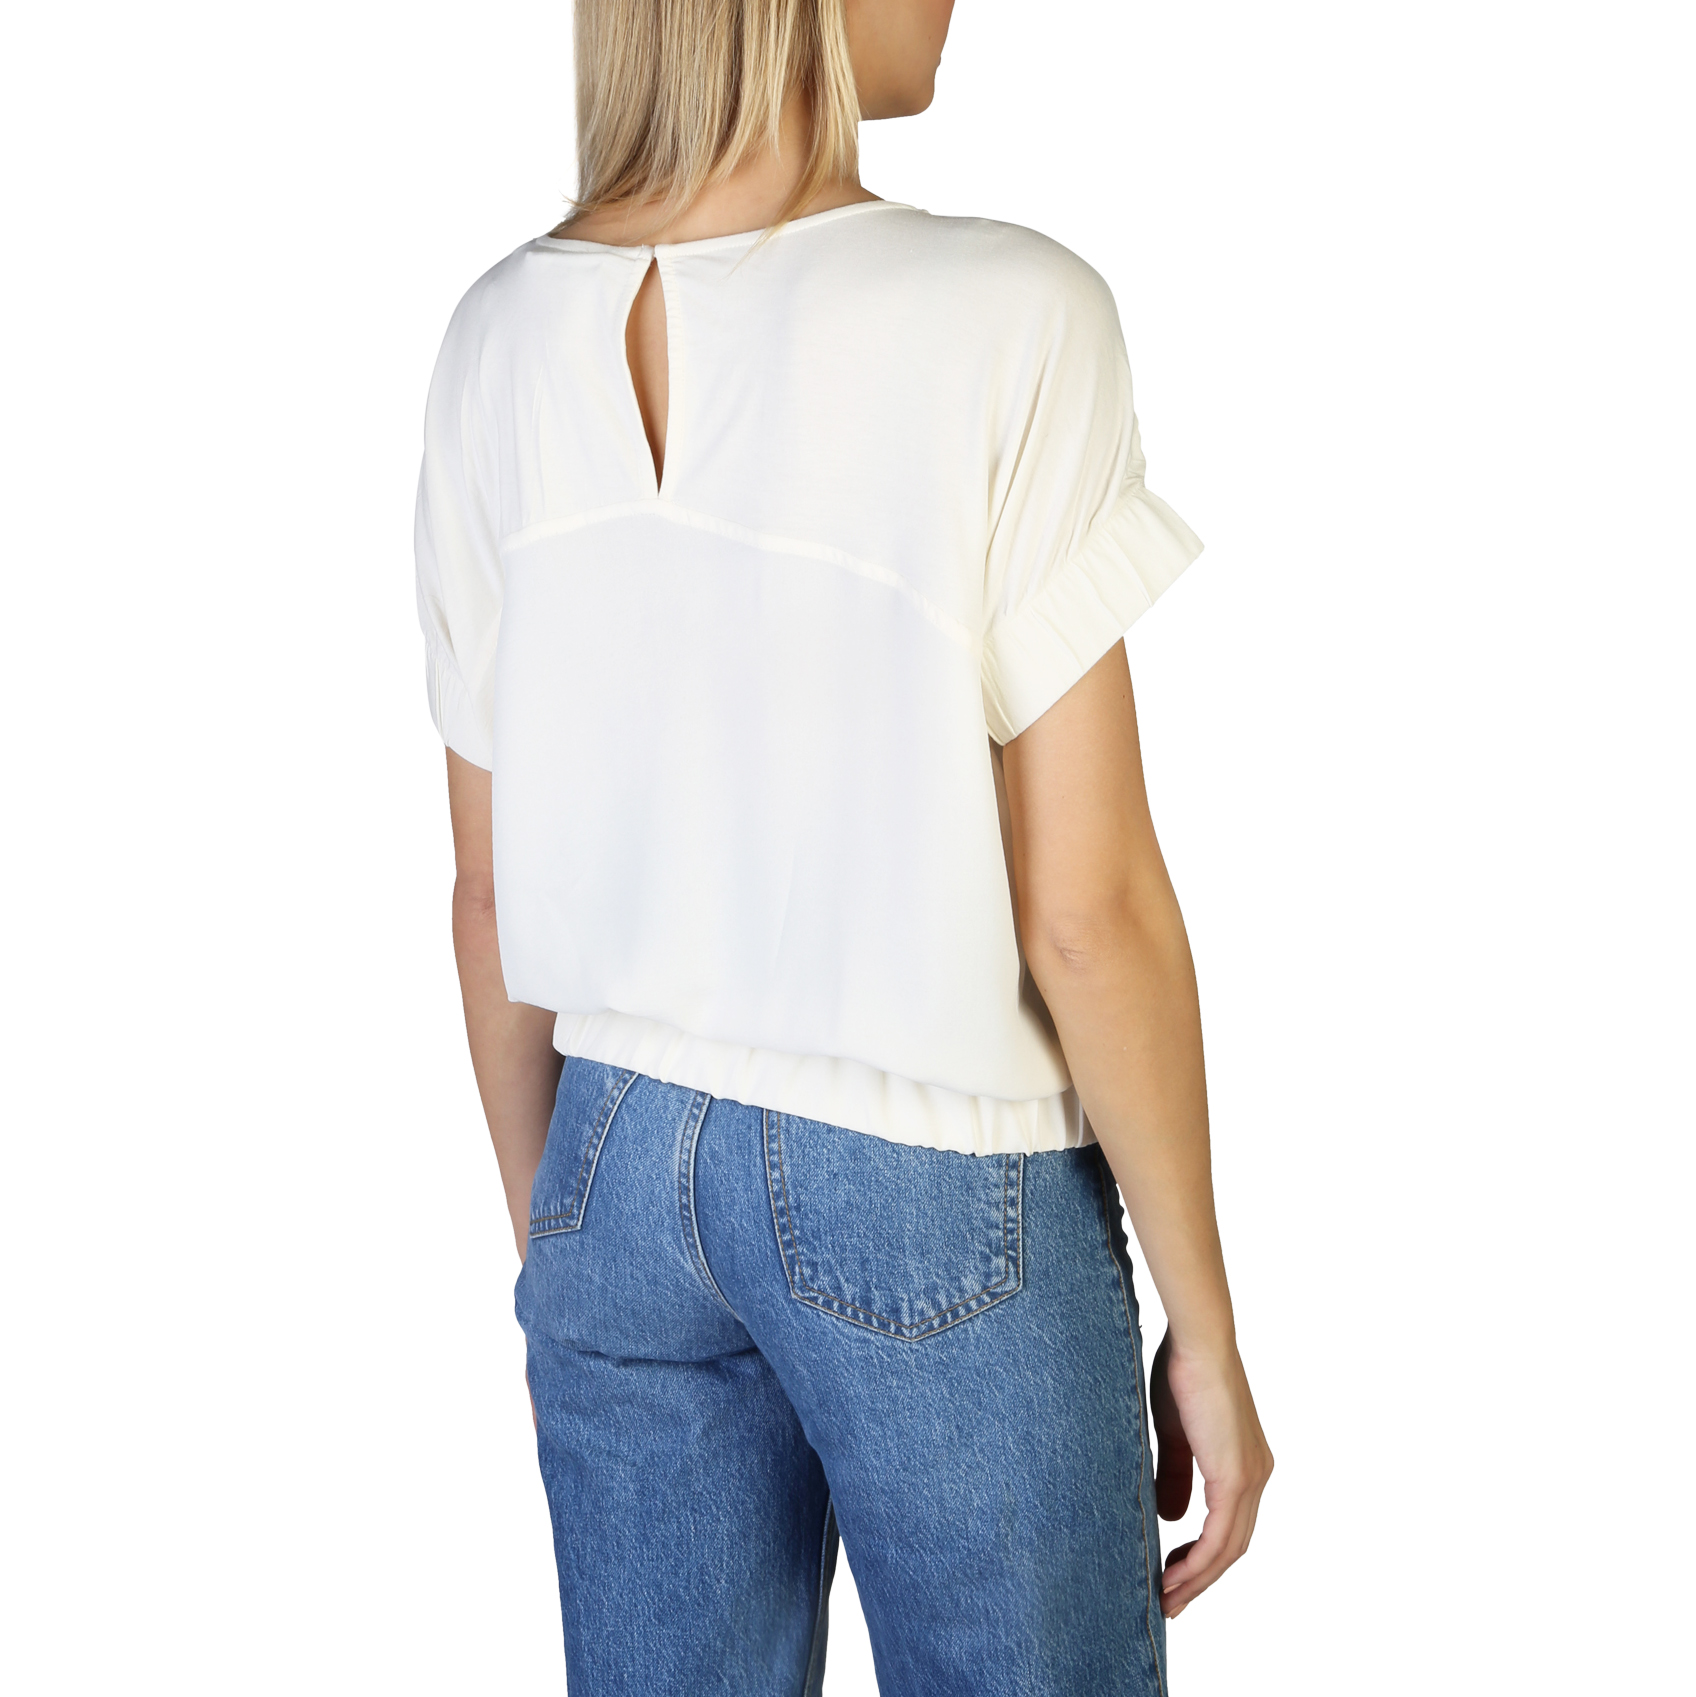 Pepe Jeans White Shirts for Women - MARGOT_PL304228